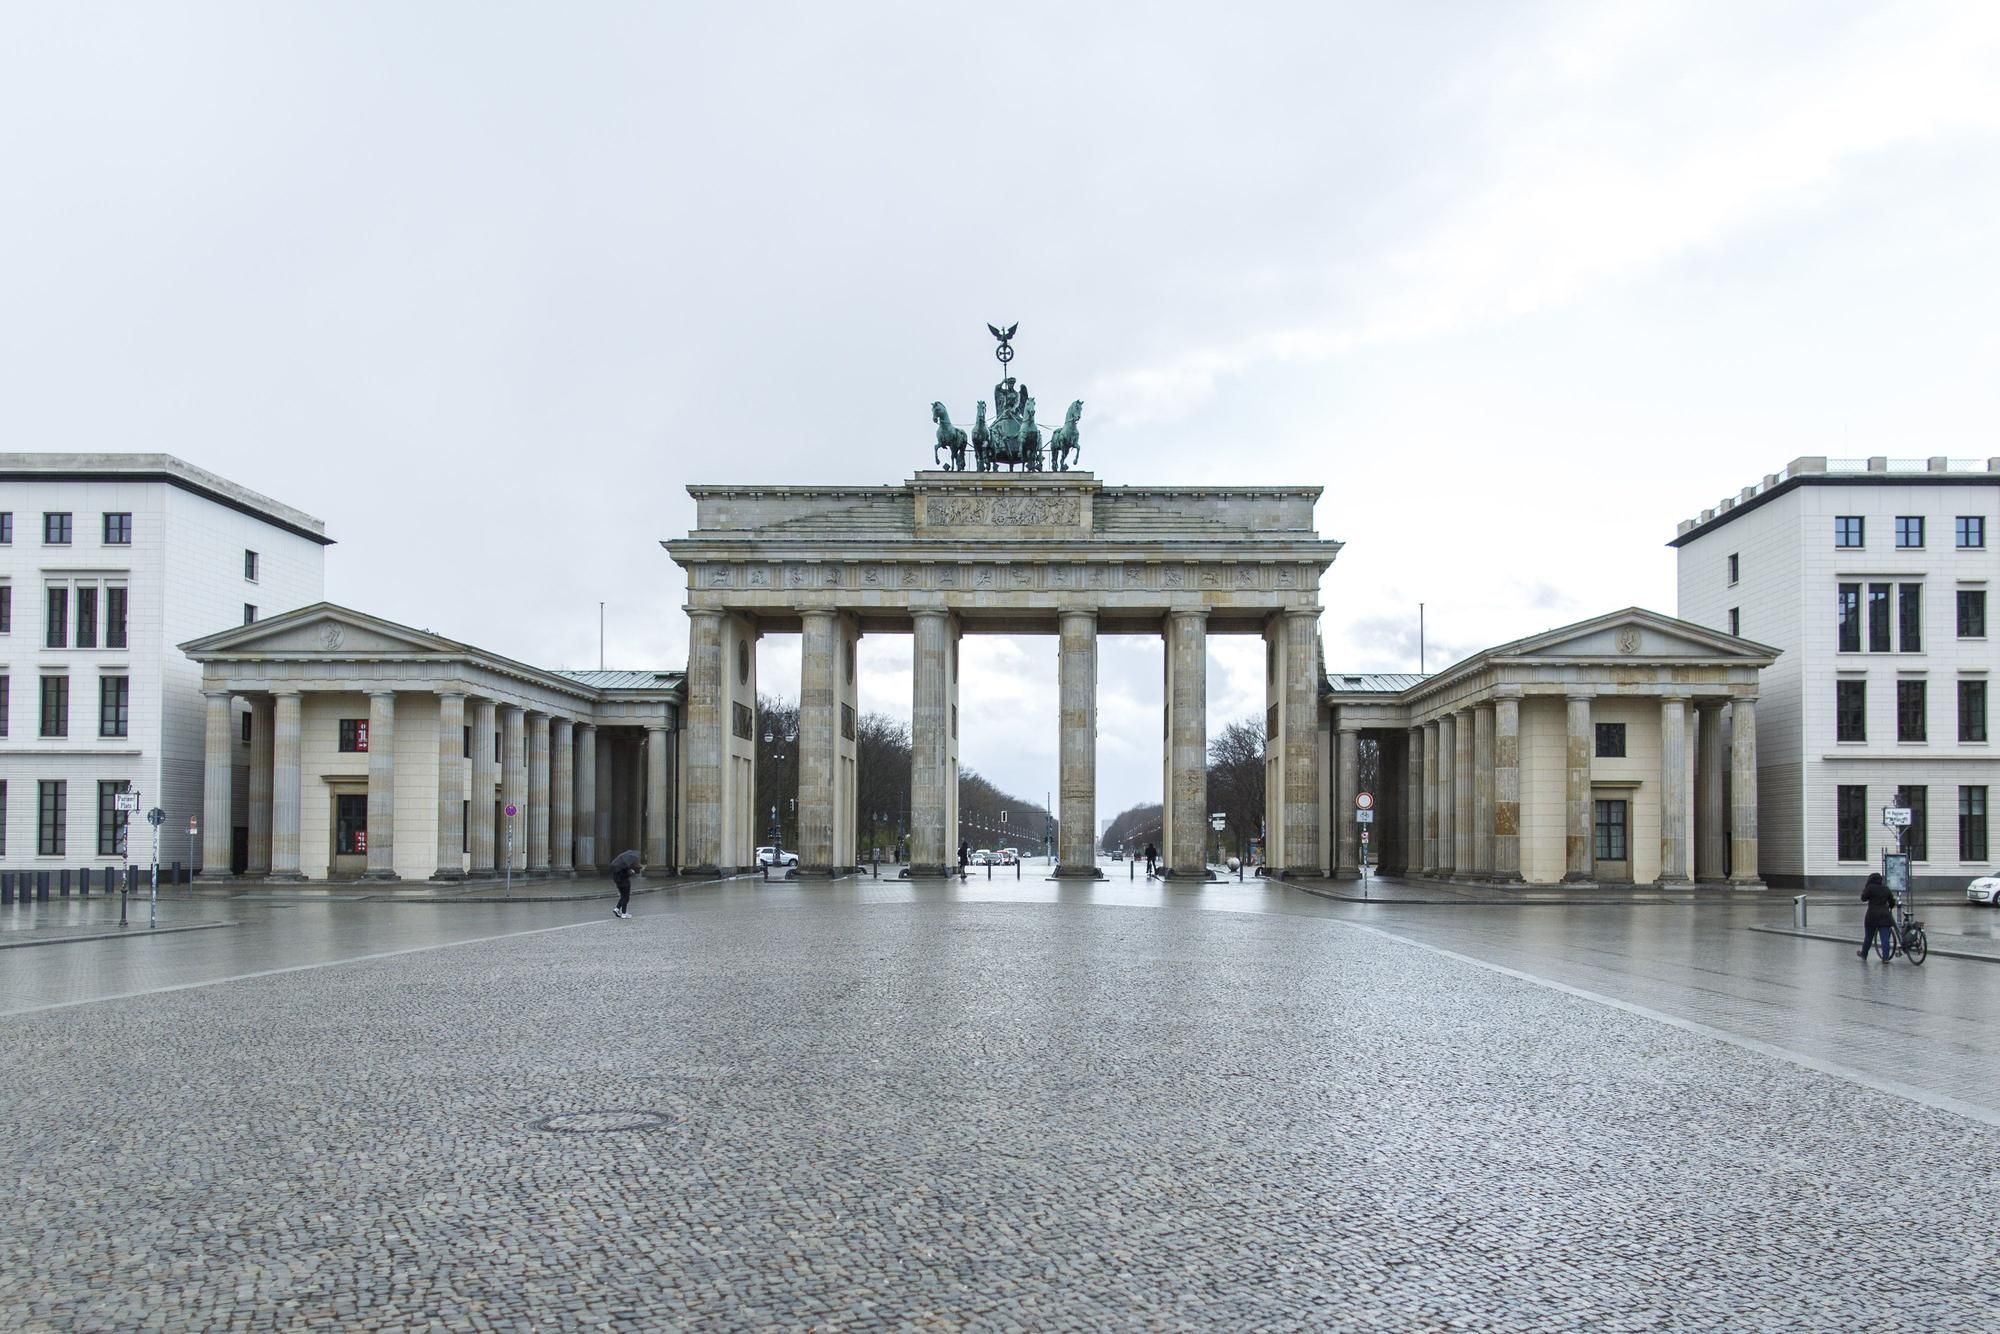 Archivo - 29 March 2020, Berlin: The Brandenburg Gate is almost deserted, amid restrictions on public life in light of the coronavirus outbreak. Photo: Carsten Koall/dpa